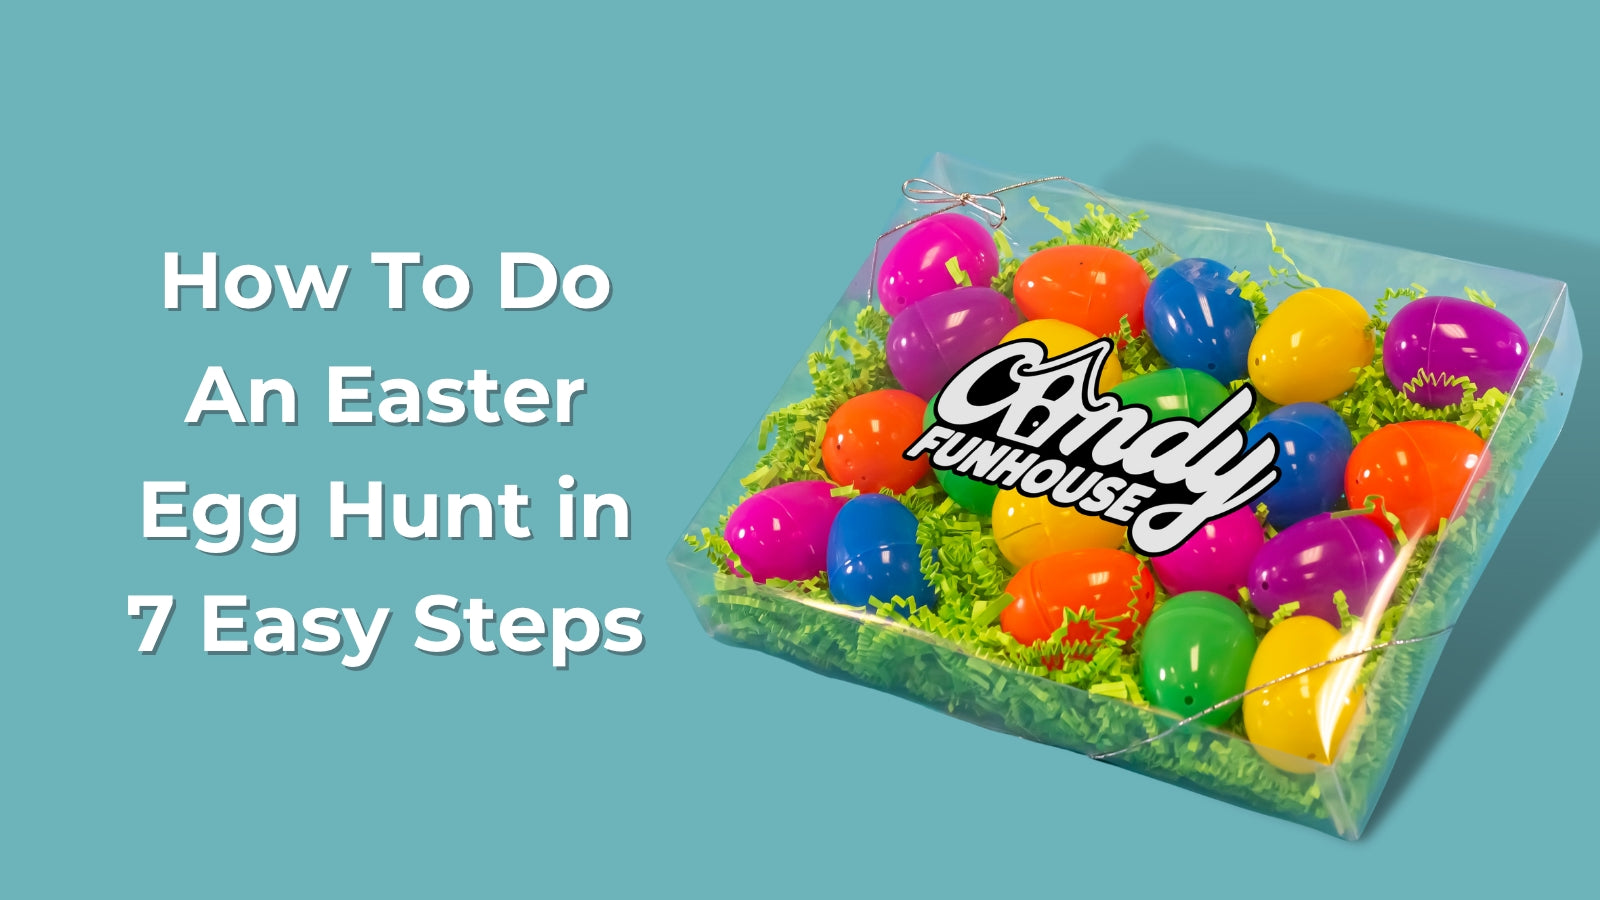 How To Do An Easter Egg Hunt in 7 Easy Steps